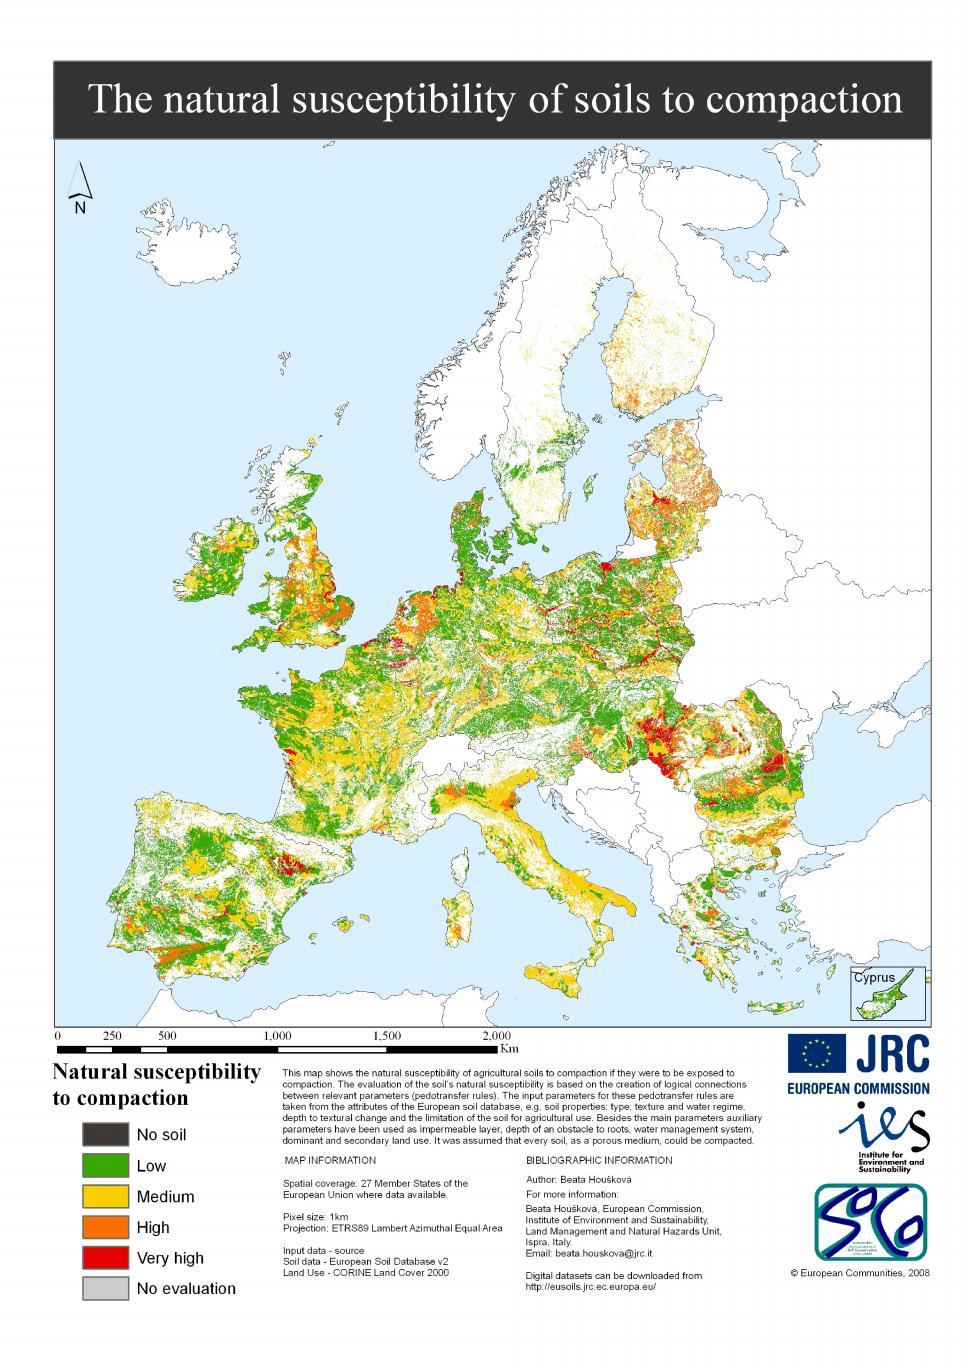 Plant Breeding and Innovative Agriculture - Annex B: Constraints for agricultural production in Europe Figure B3: Natural